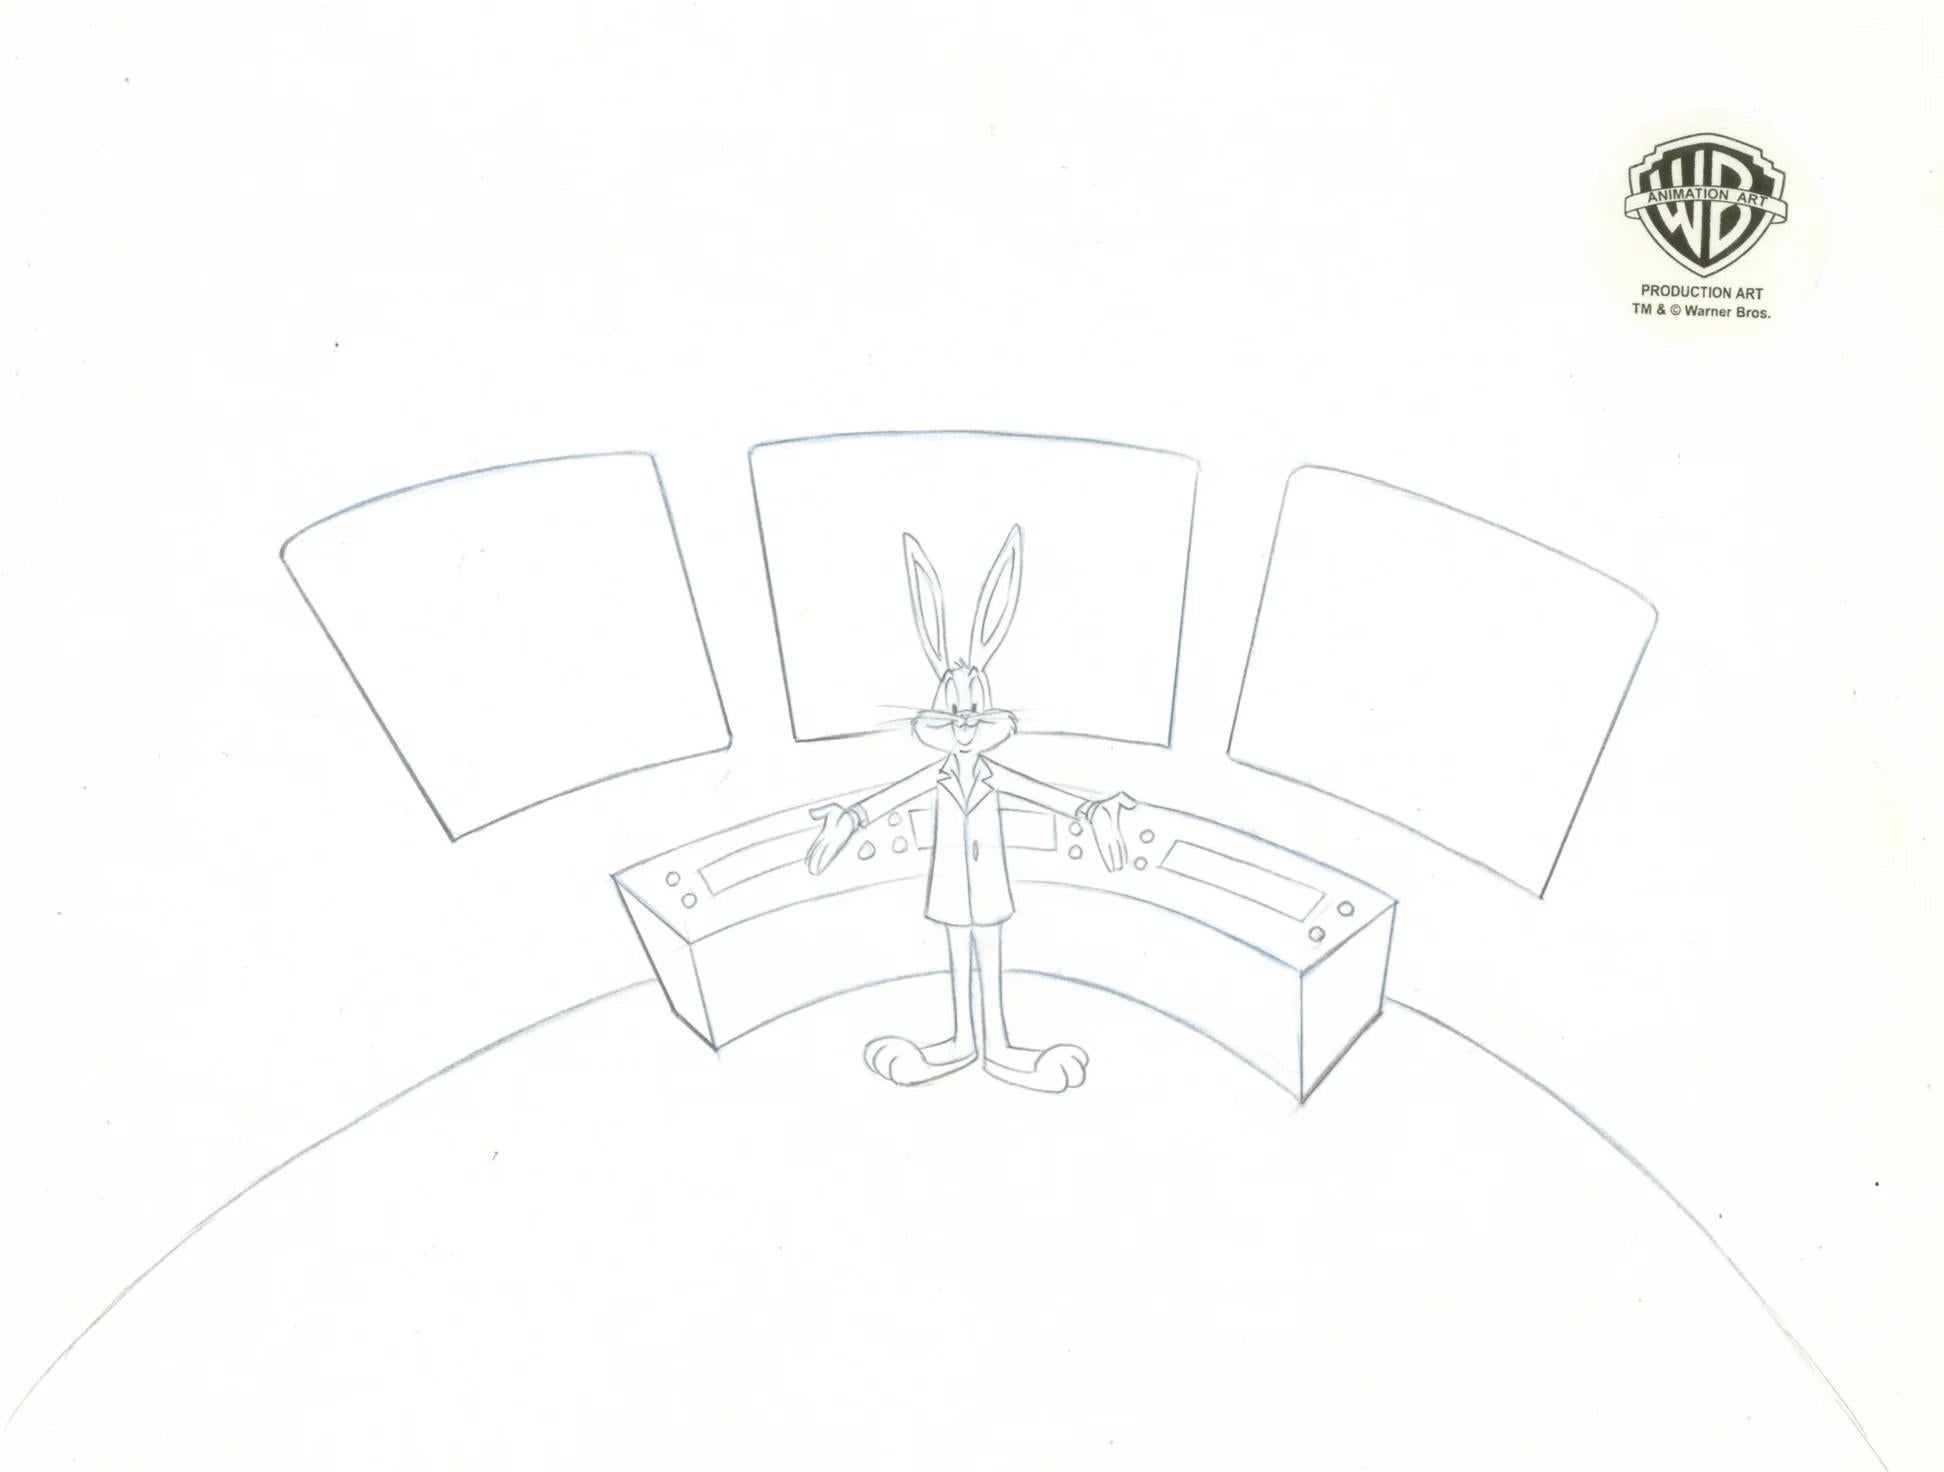 Looney Tunes Original Production Drawing Bugs Bunny - Art by Looney Tunes Studio Artists